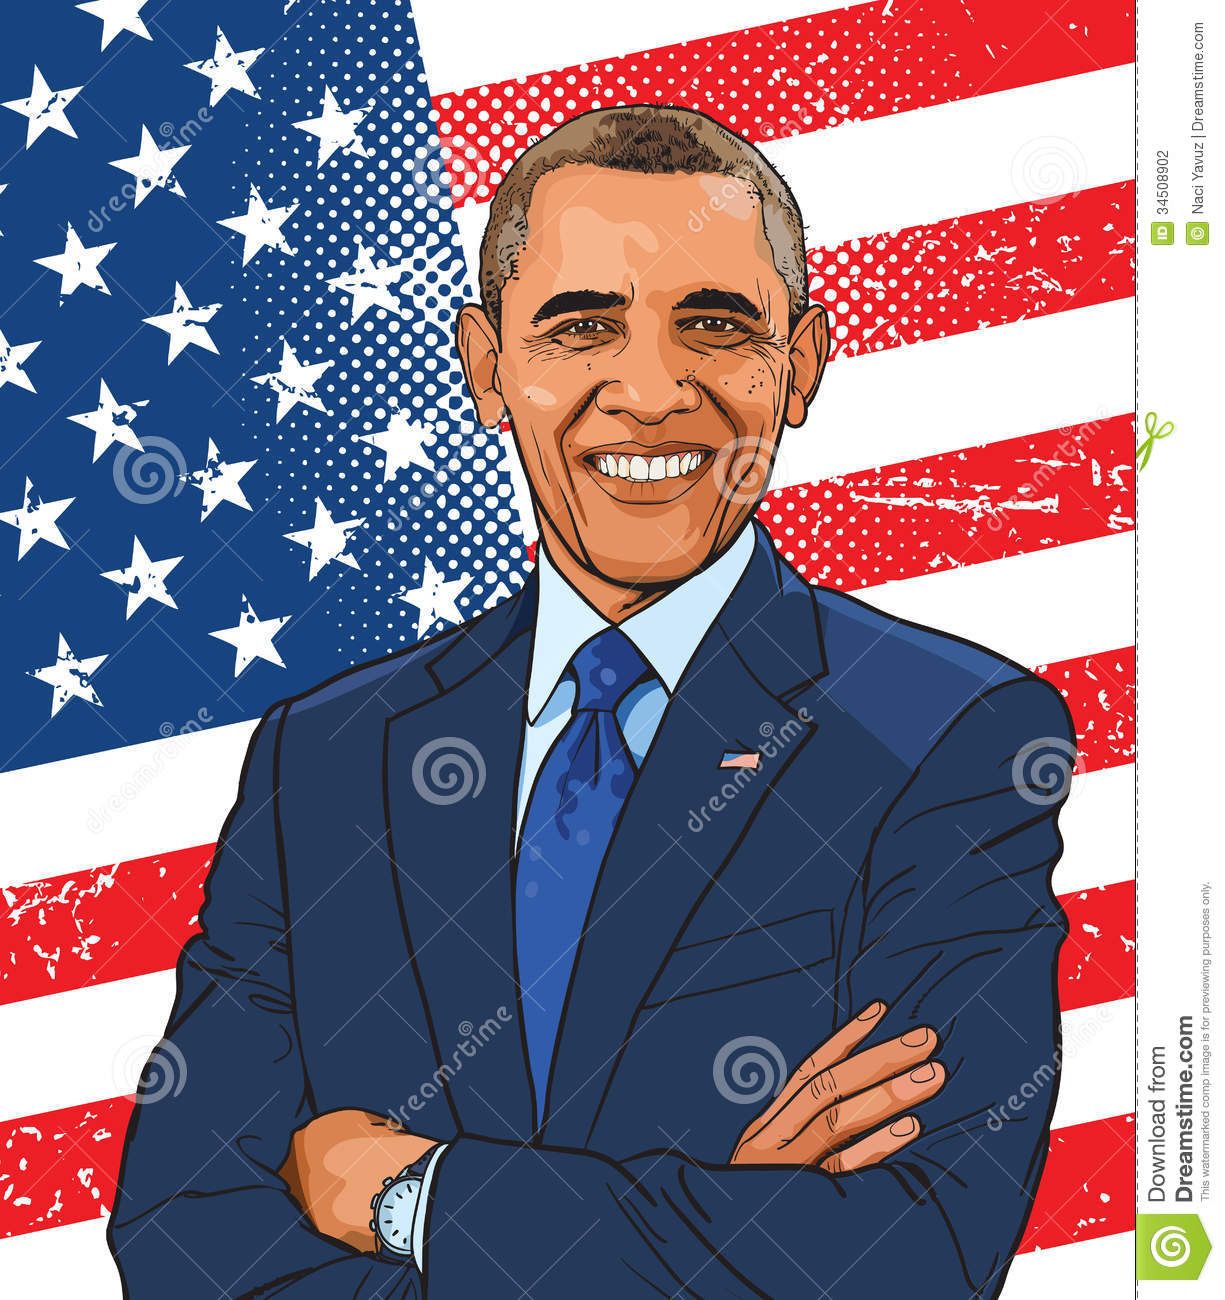 Obama Clipart - Clipart Suggest